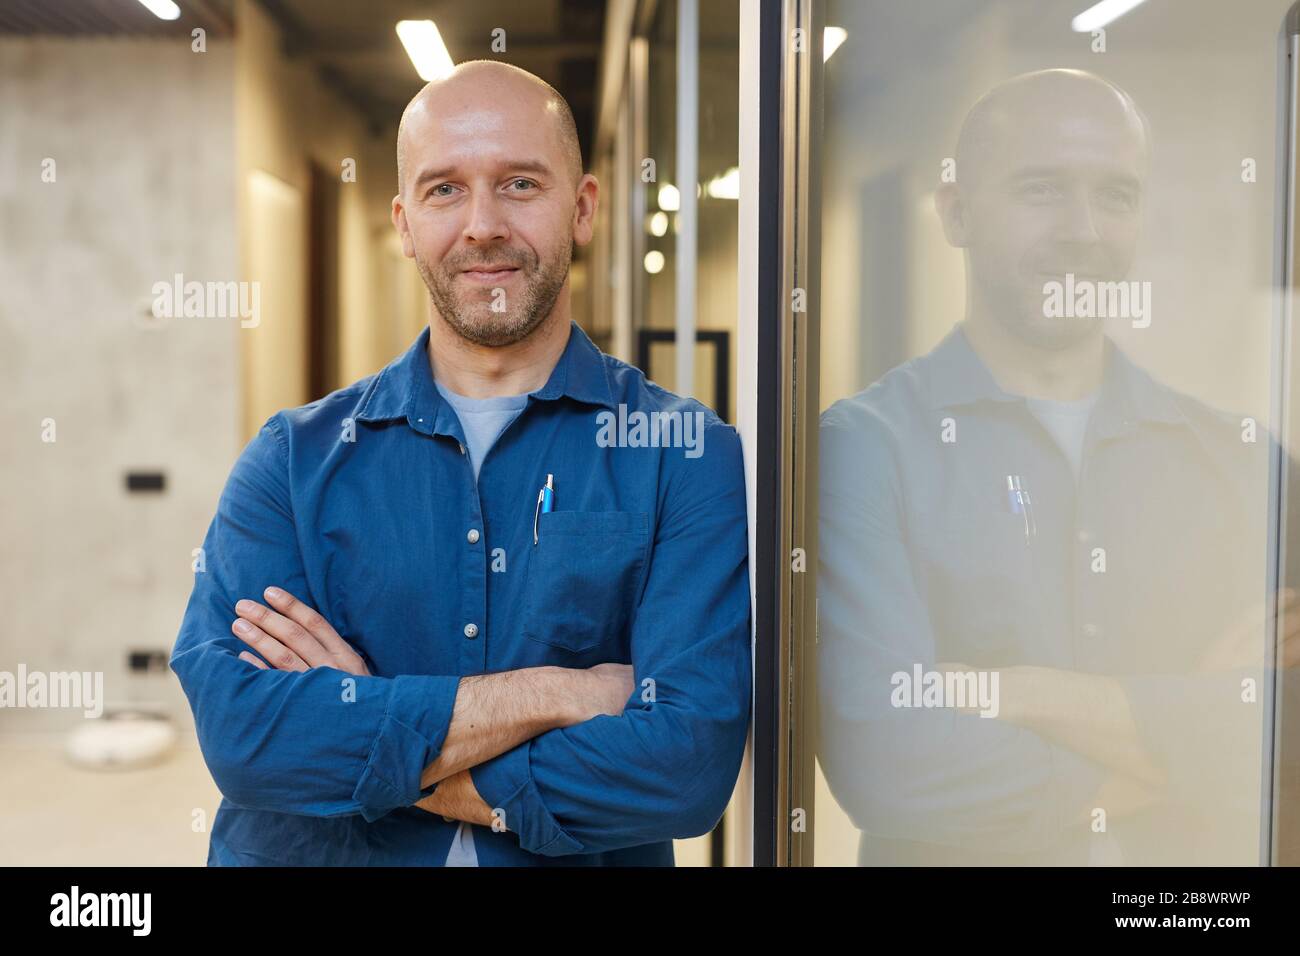 Waist up portrait of mature bald man smiling at camera while standing with arms crossed and posing confidently leaning against wall, copy space Stock Photo